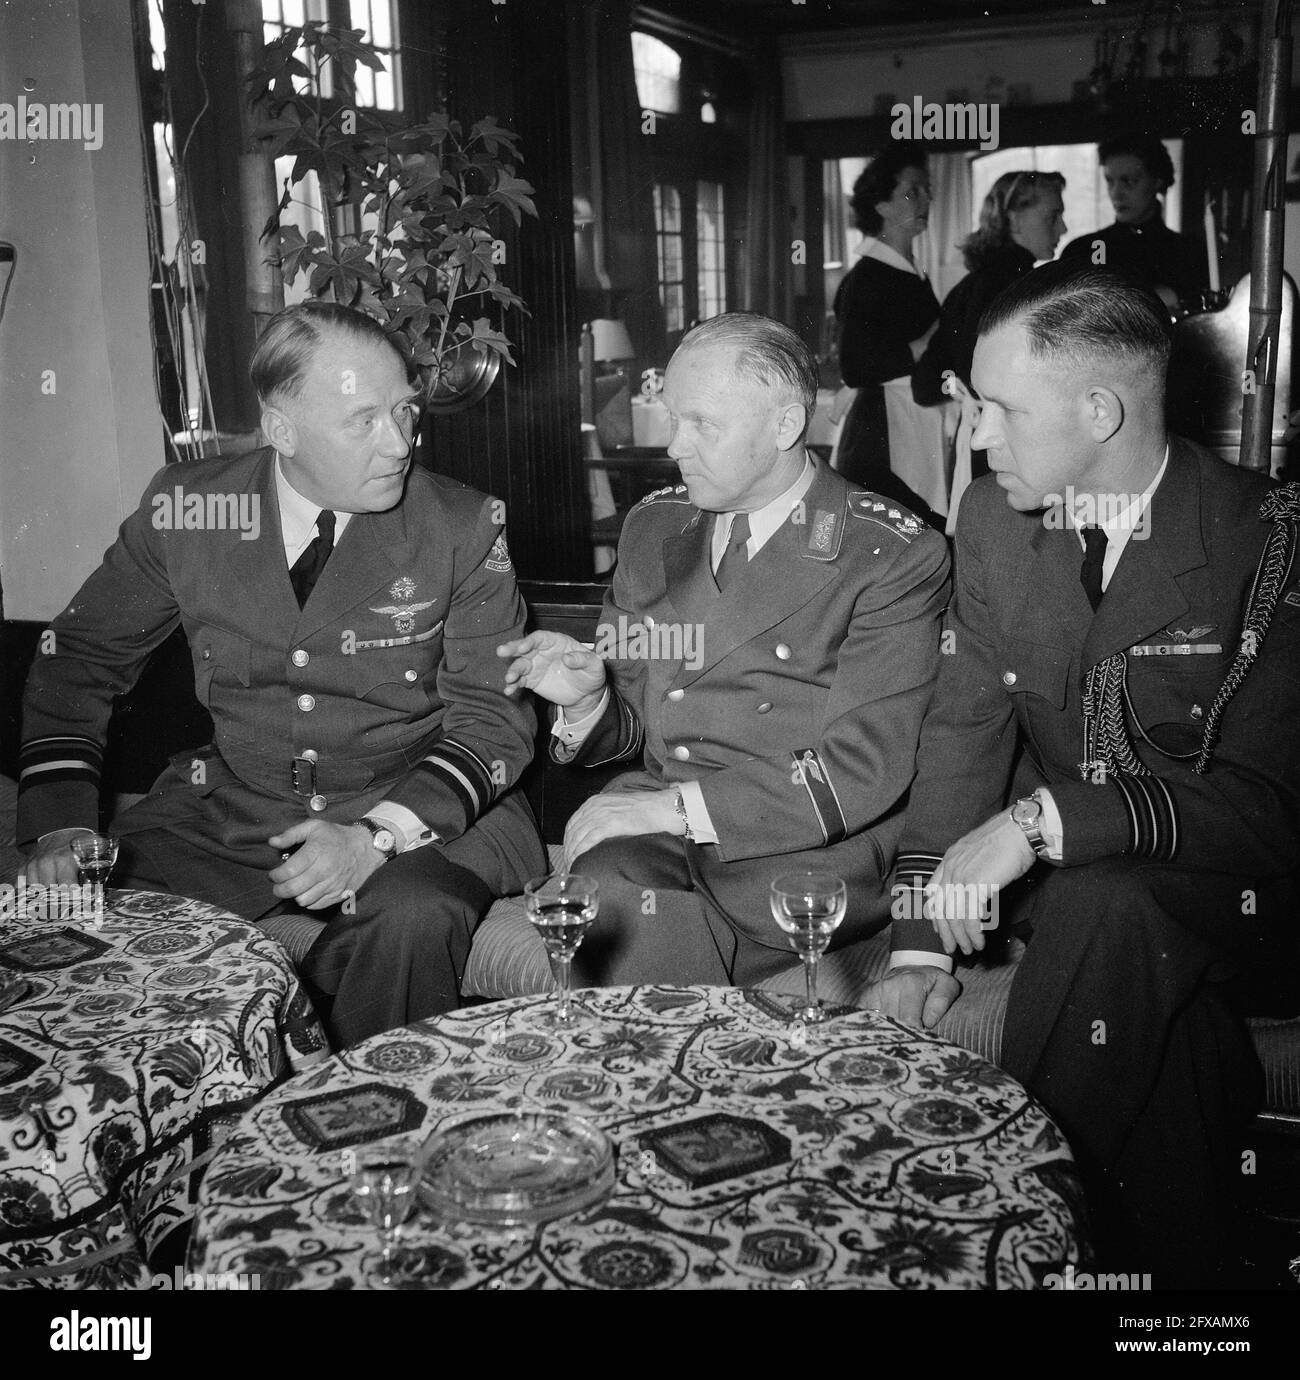 German General Air Force Josef Kammhuber, Commander of the Luftwaffe der  Bundeswehr. in our country, February 27, 1957, visits, army, air force,  officers, The Netherlands, 20th century press agency photo, news to